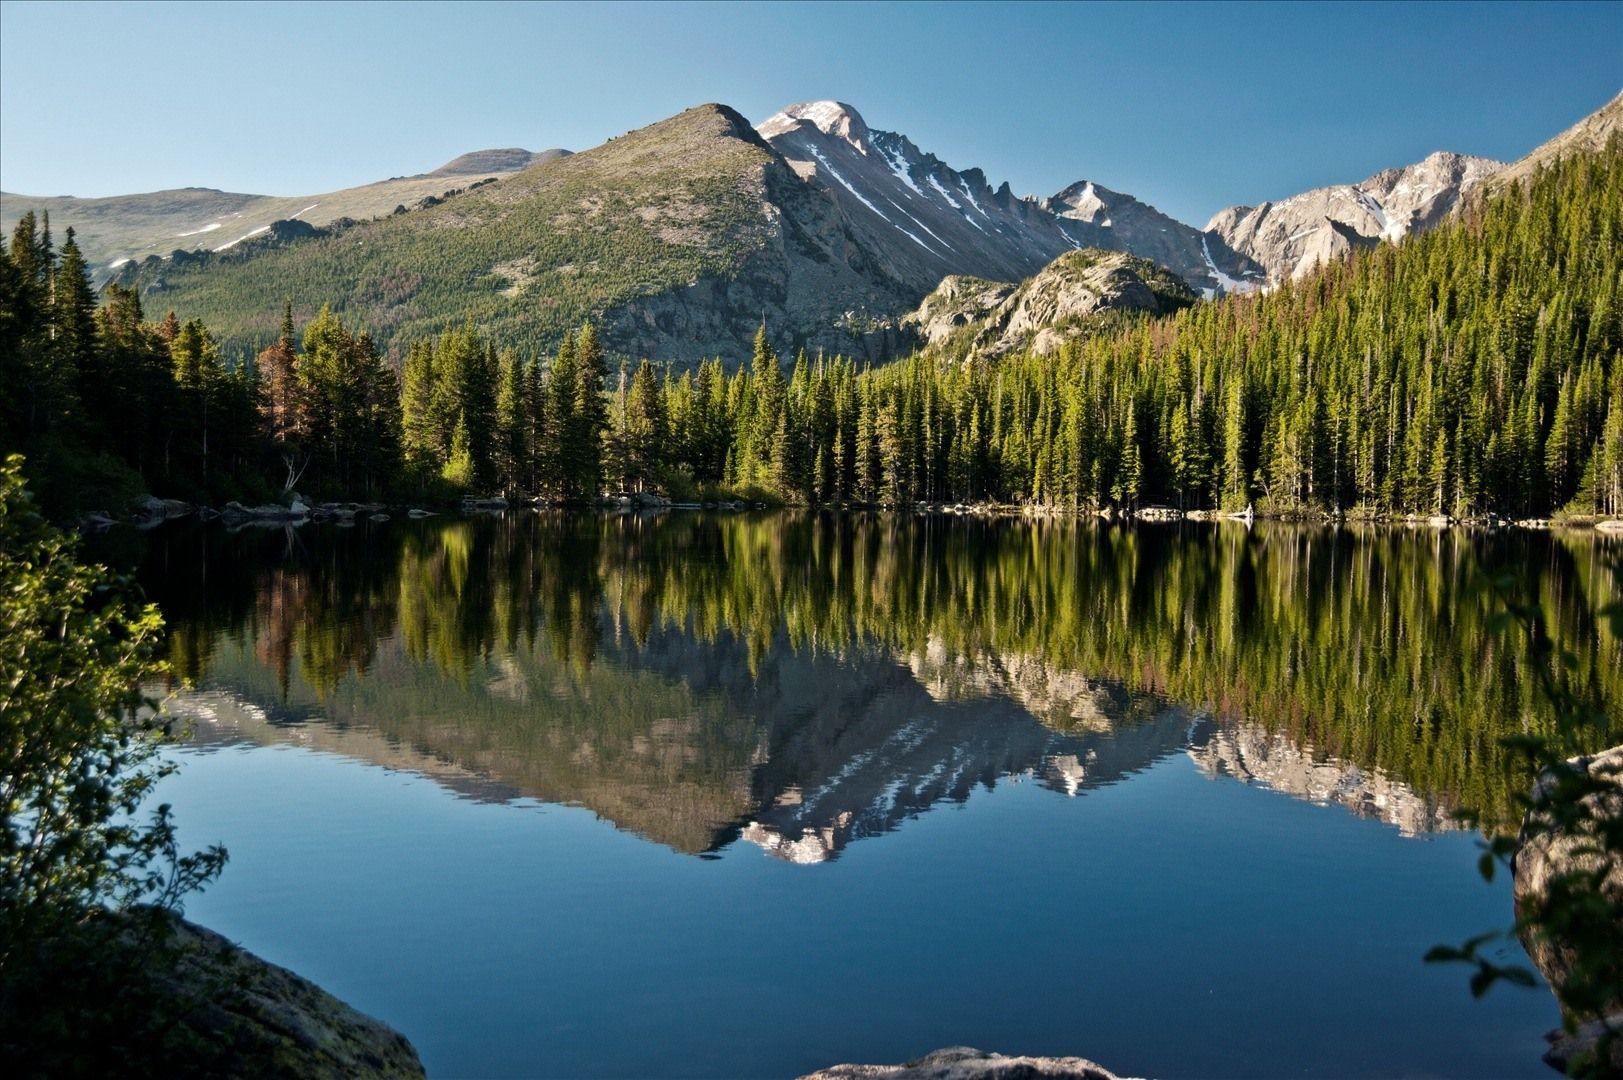 This is a photo of the Rocky Mountain National Forest. This is